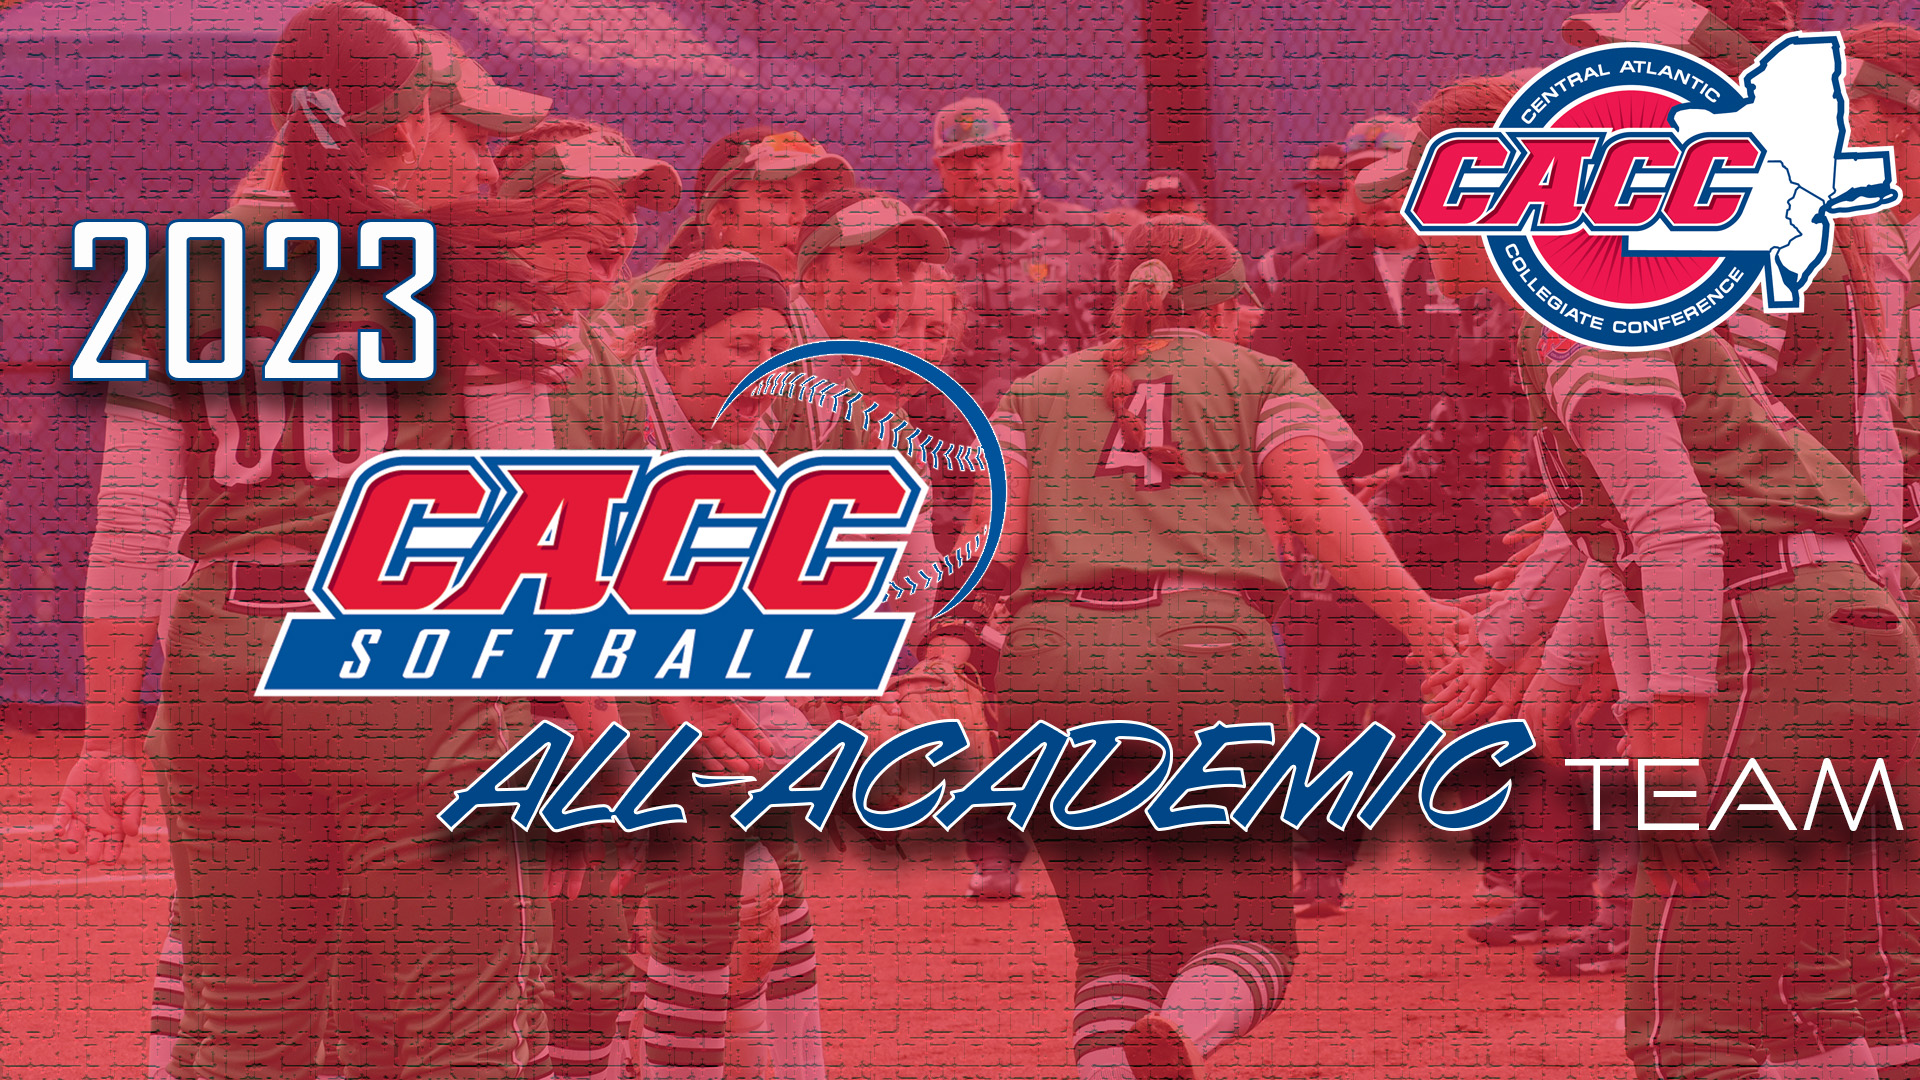 79 S-As Named to 2023 CACC Softball All-Academic Team